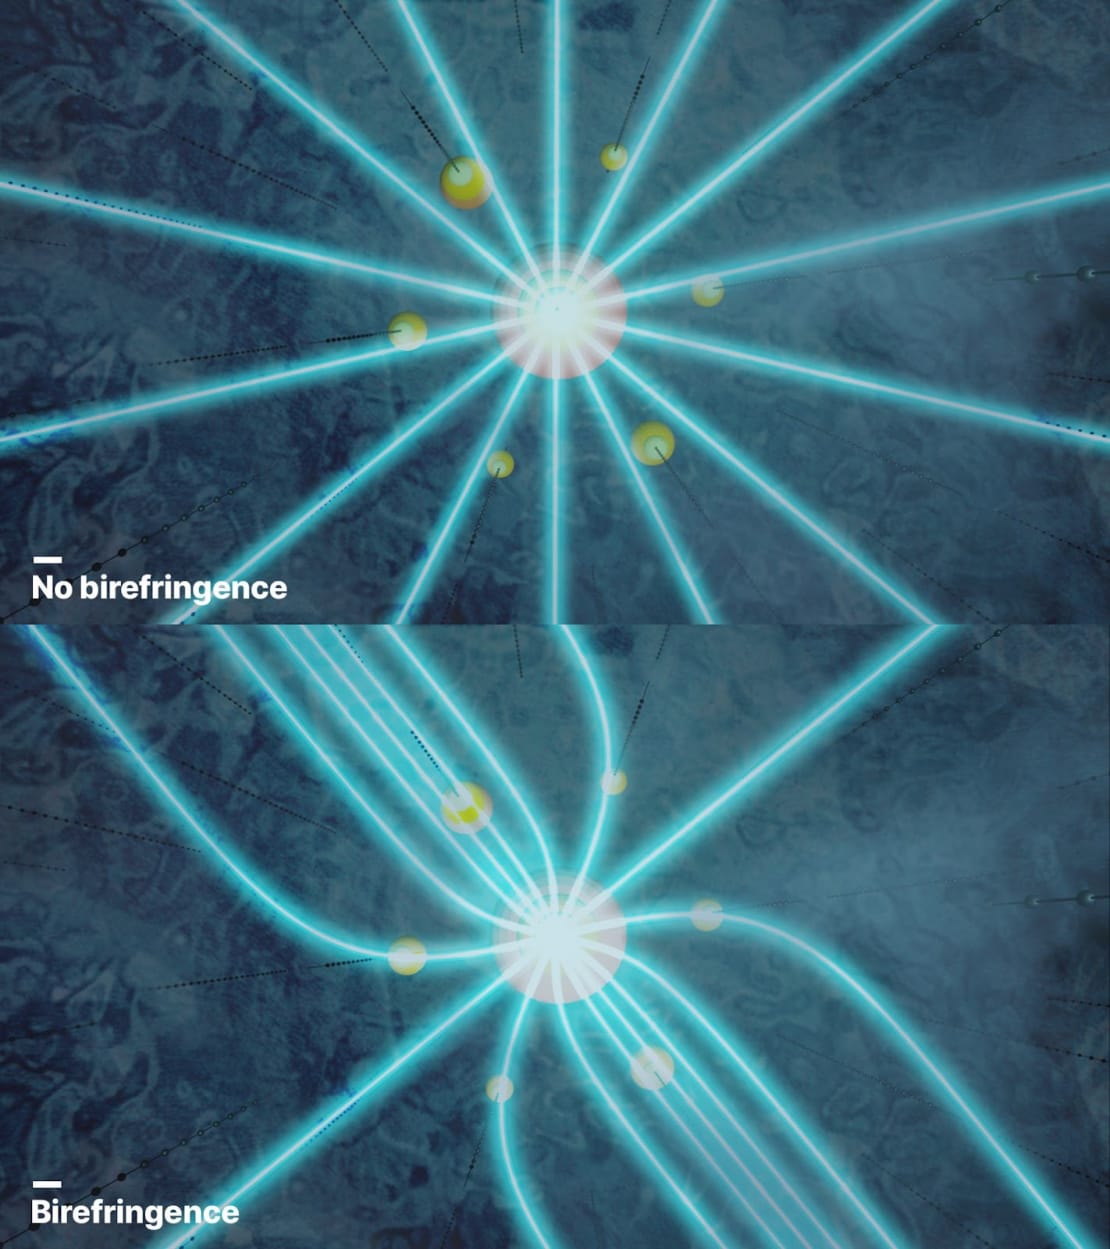 Artist’s illustration visualizing the newly discovered optical effect. Without birefringence (top), light streams out radially from an isotropic light source. With birefringence (bottom), light gets slowly deflected towards the ice flow axis